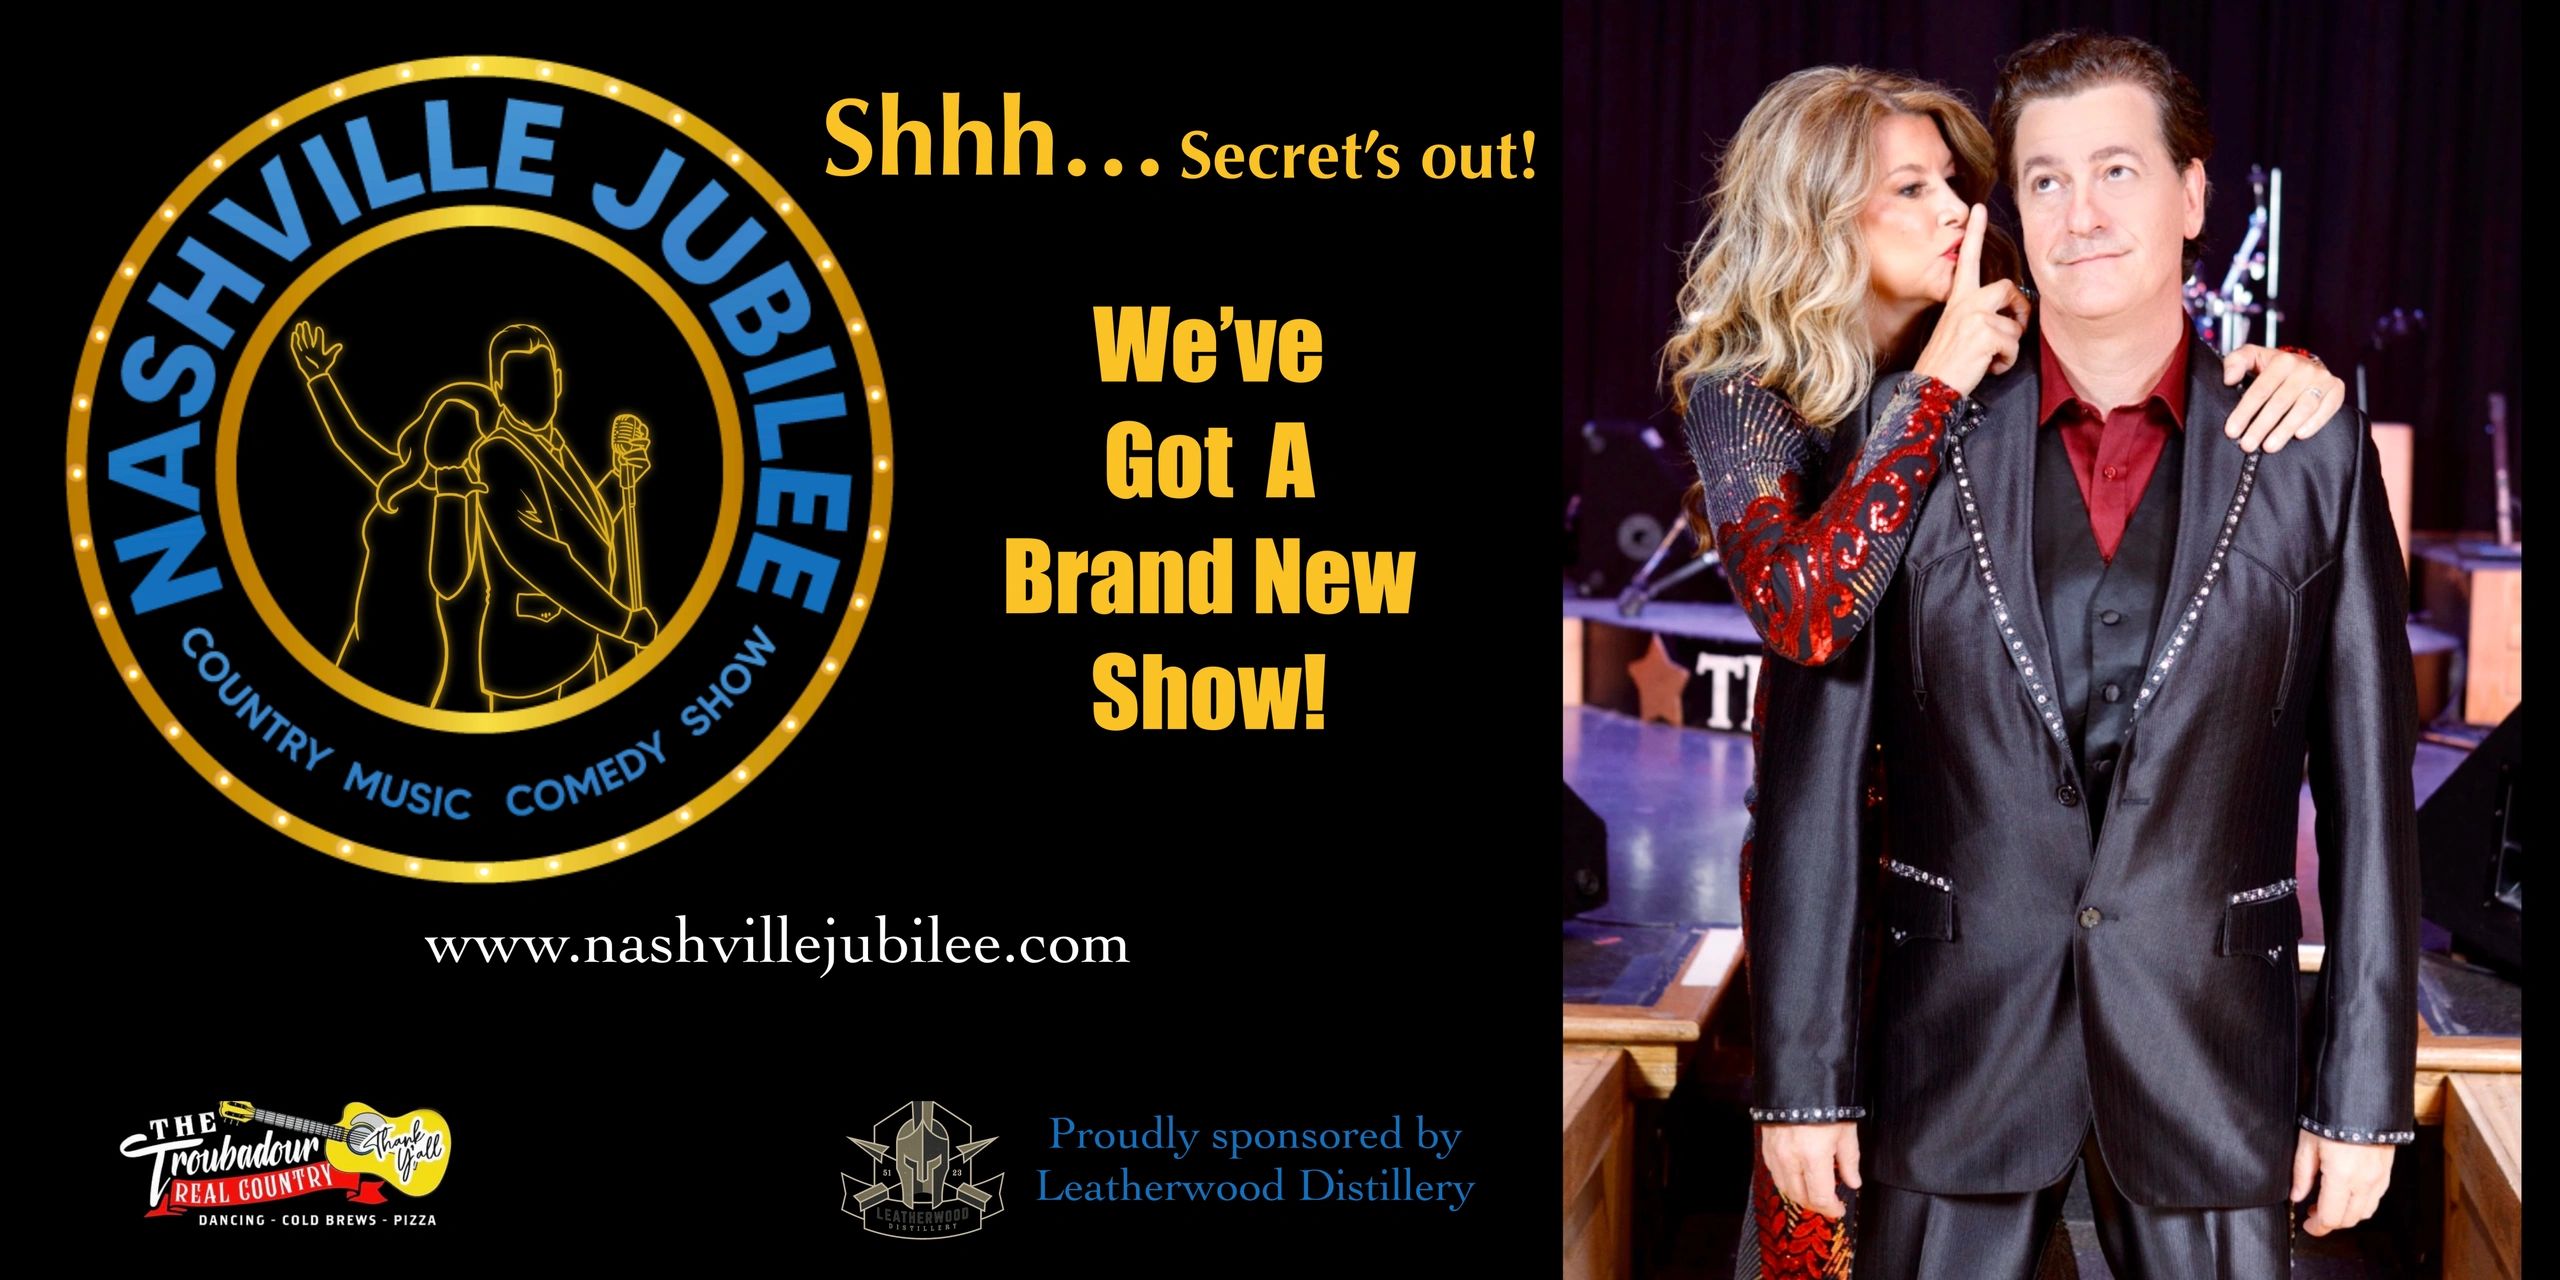 Nashville Jubilee Country Music Comedy Show